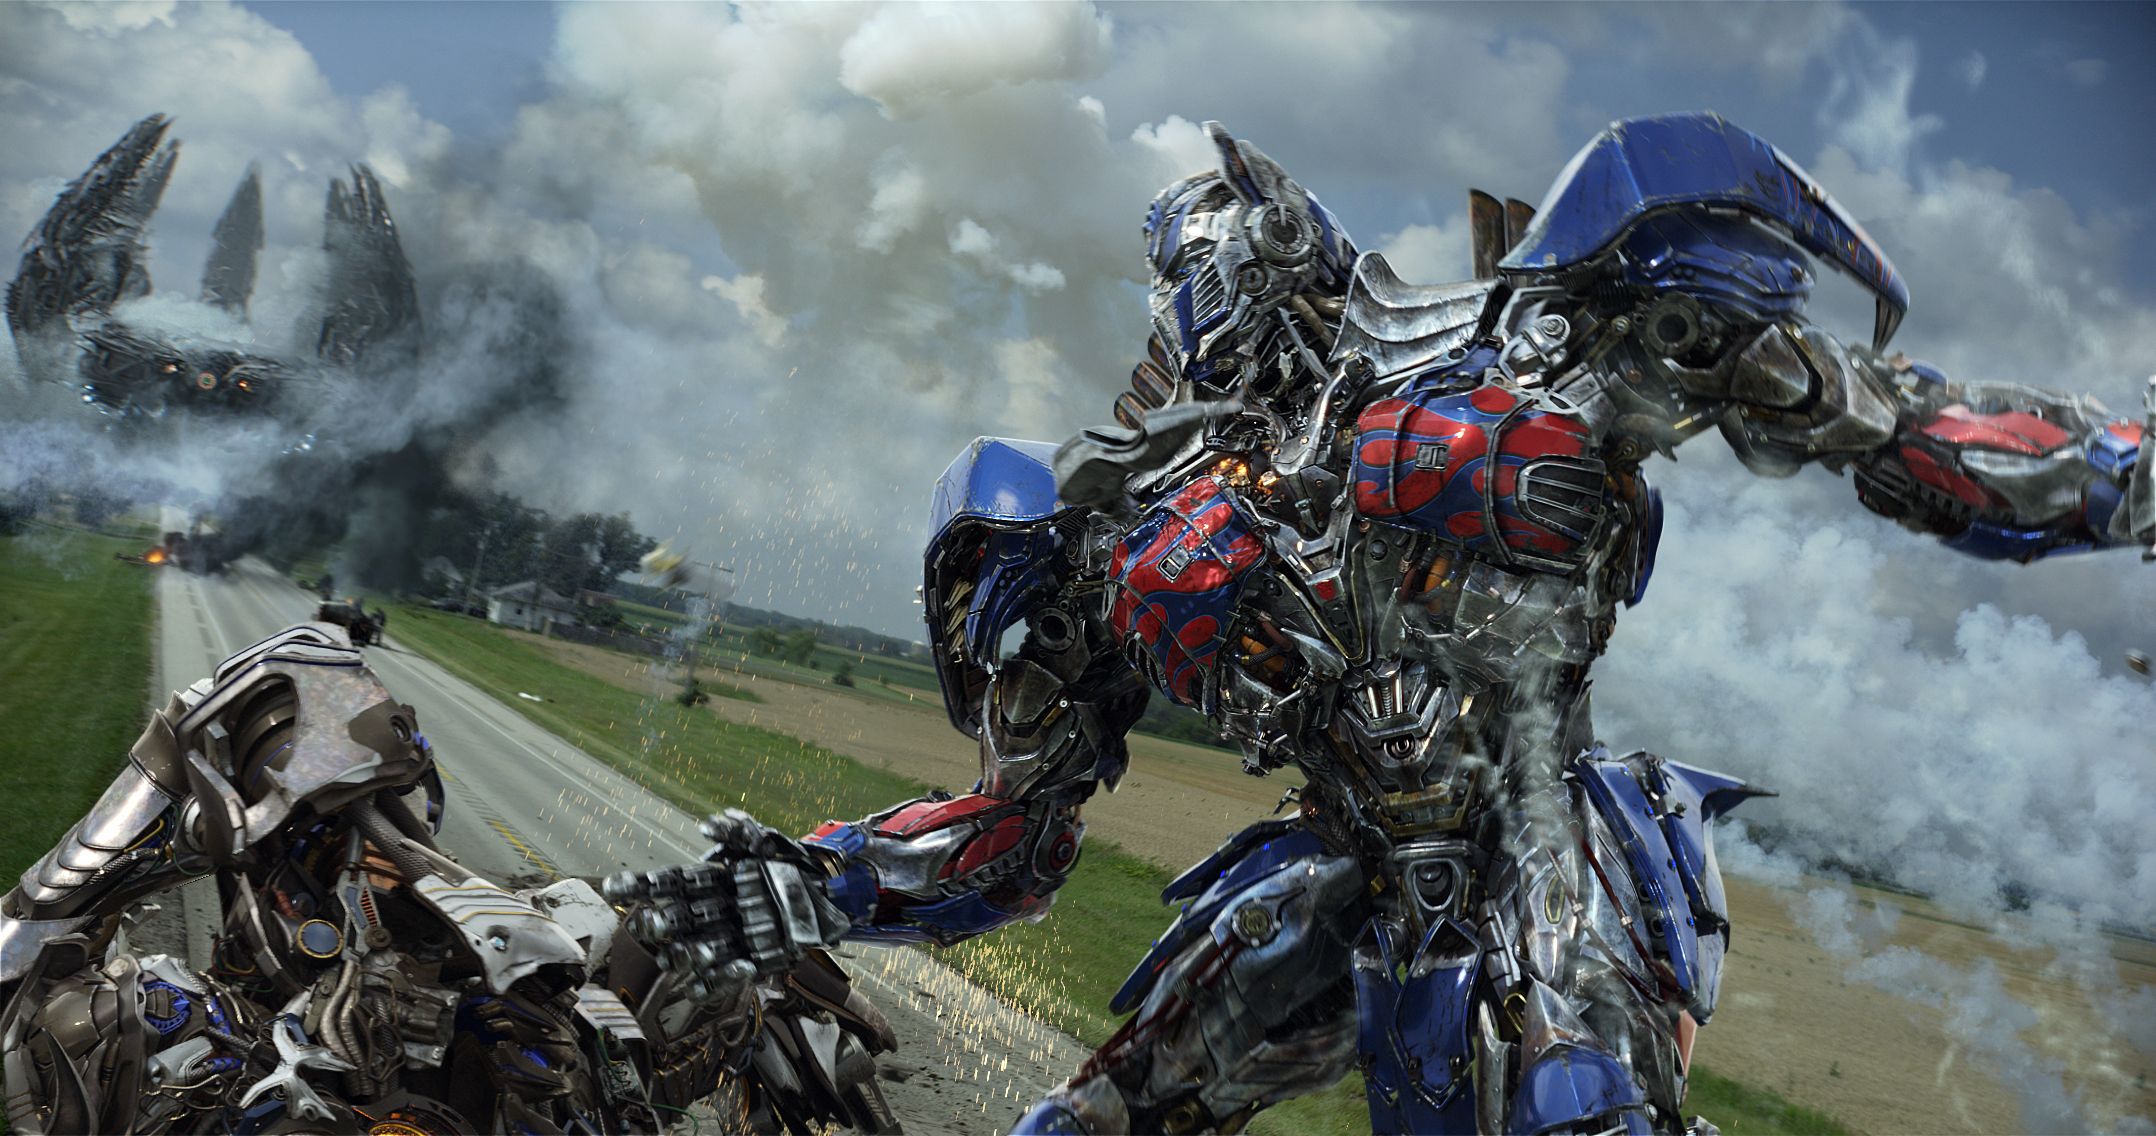 Three 'Transformers' Movies Get Release Dates!